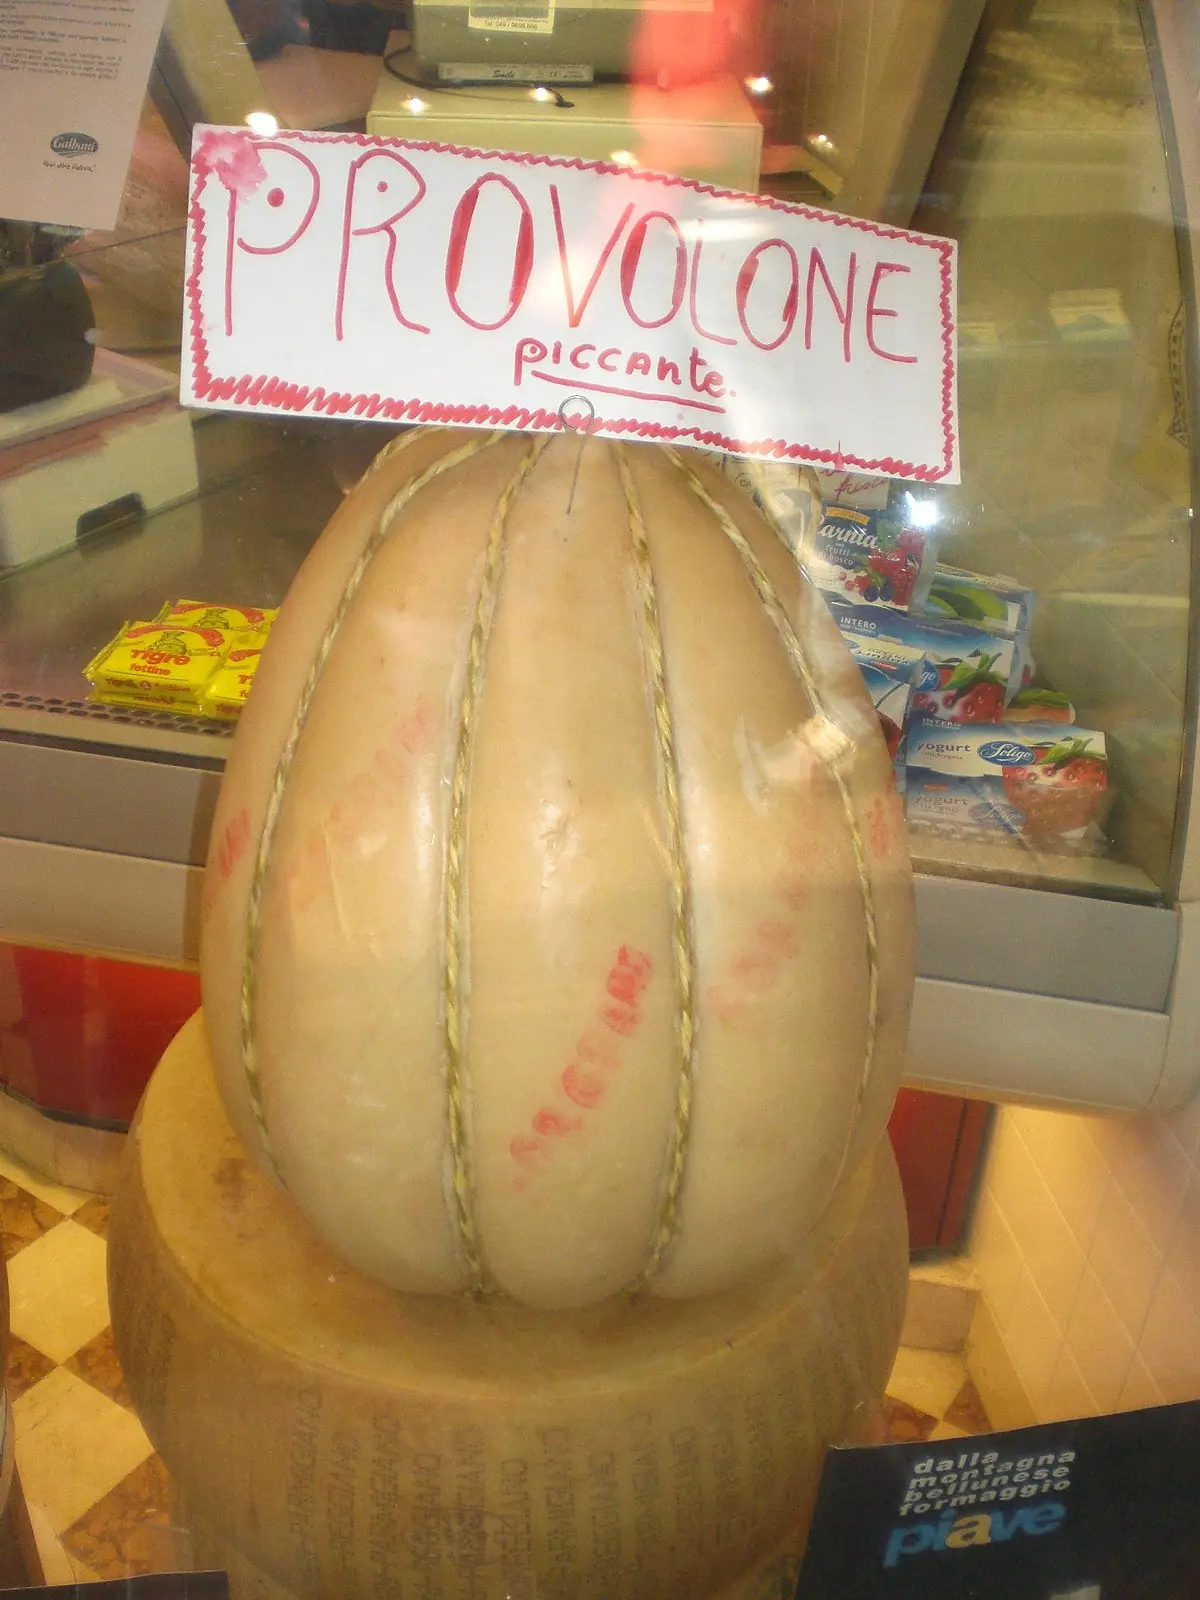 smoked provola cheese - Is provola and Provolone the same cheese